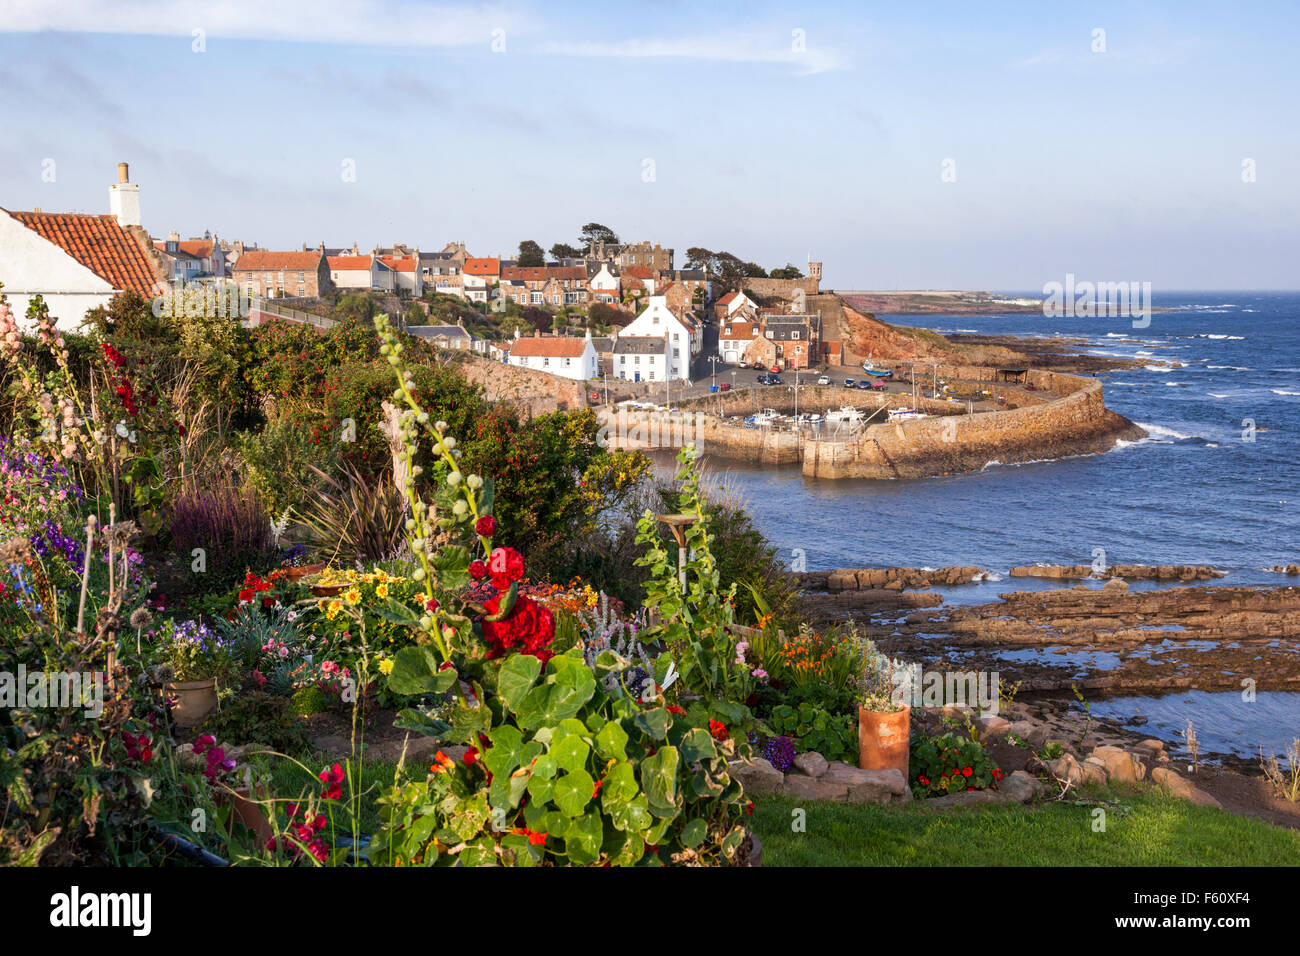 Evening light on the little fishing village of Crail in the East Neuk of Fife, Scotland UK Stock Photo